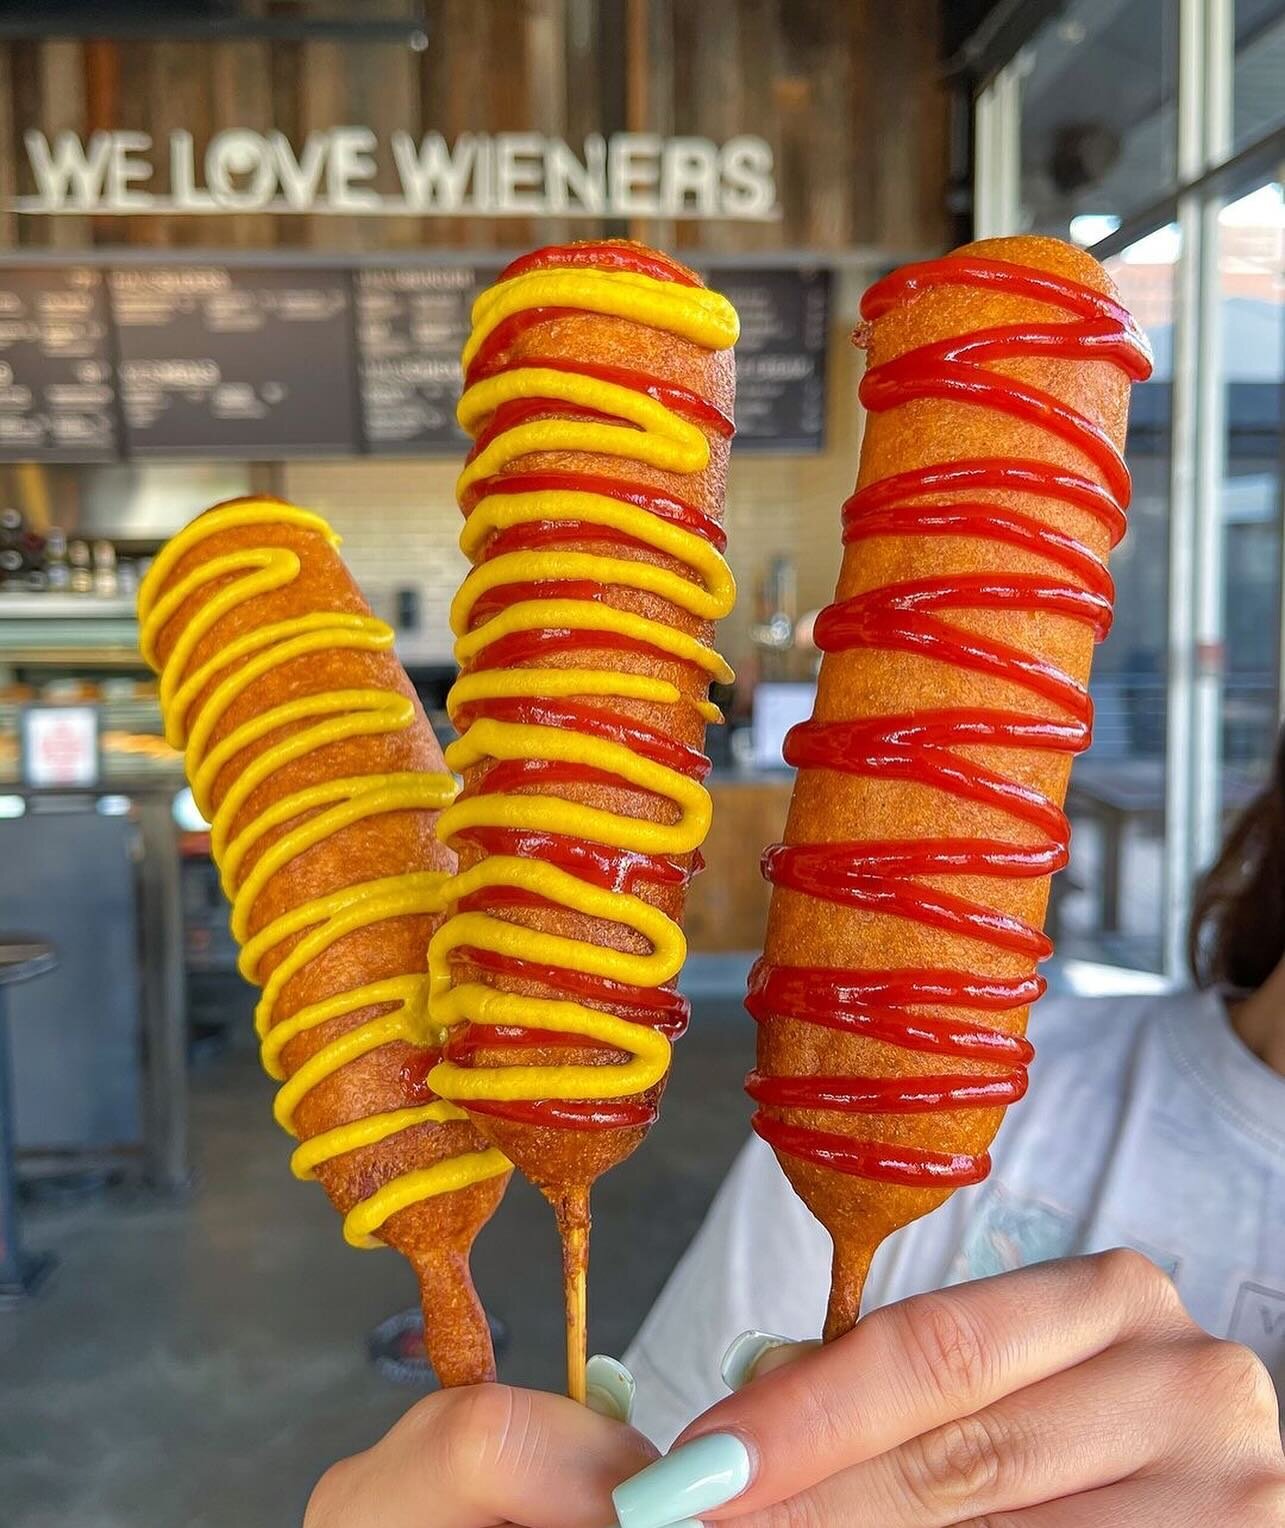 Word on the street is that it's #NationalCornDogDay 👀 🔥

Did you know you can get any @doghaus_bellaterra dogs or sausages dipped in their Haus-made root beer batter + fried as a corn dog!? Celebrate #NationalCornDogDay at DogHaus, and don't forget